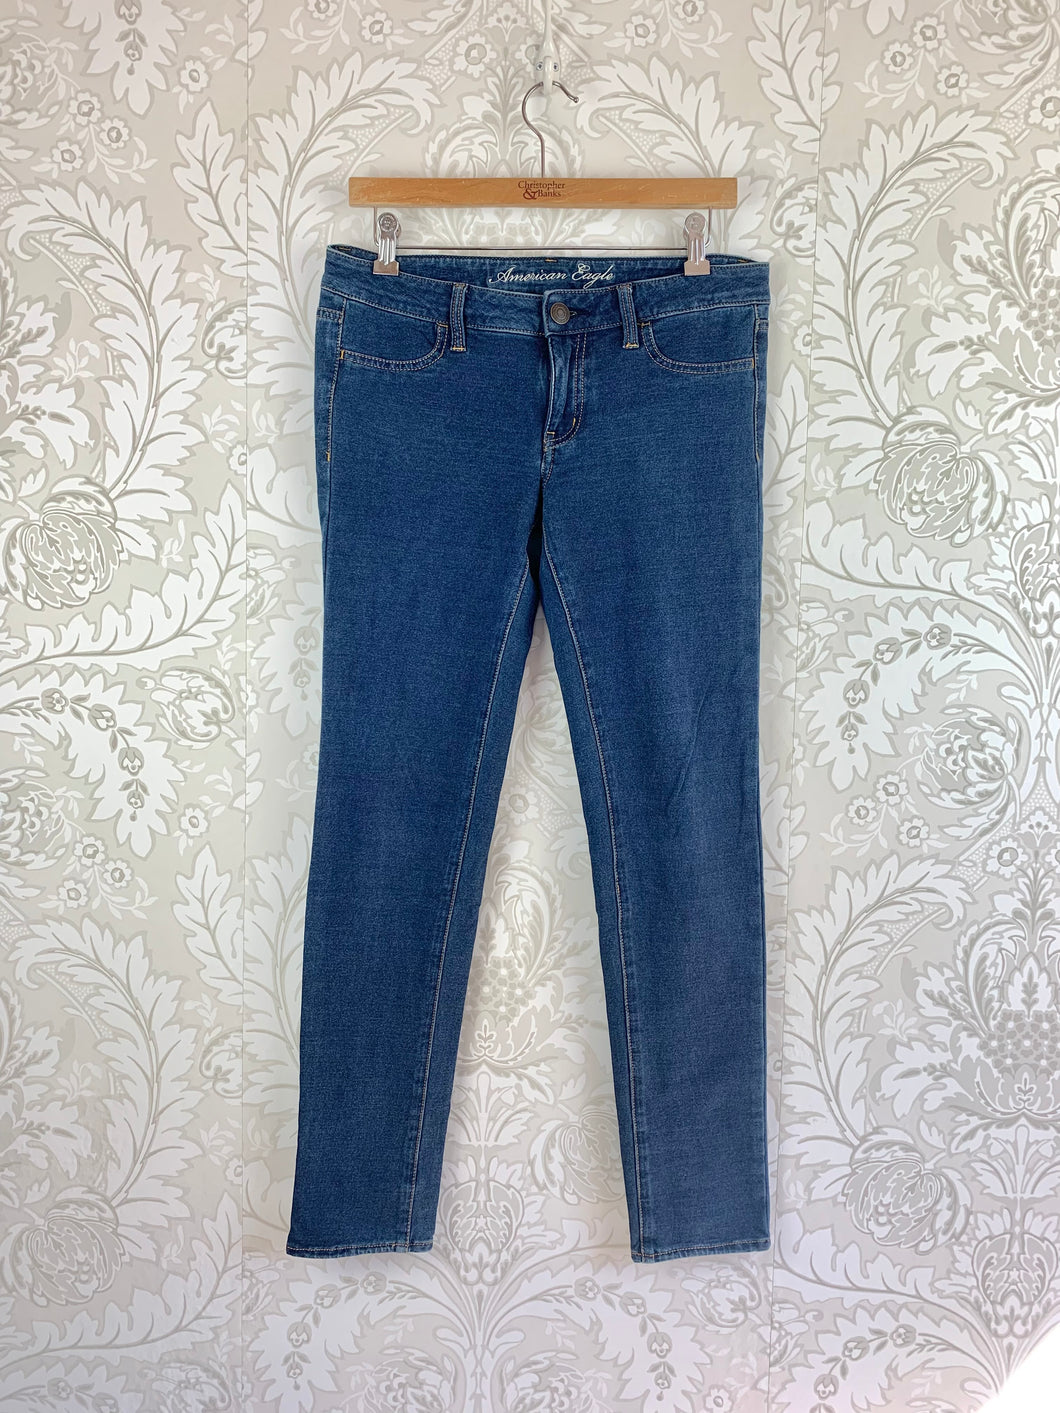 American Eagle Stretch Jeggings size 8